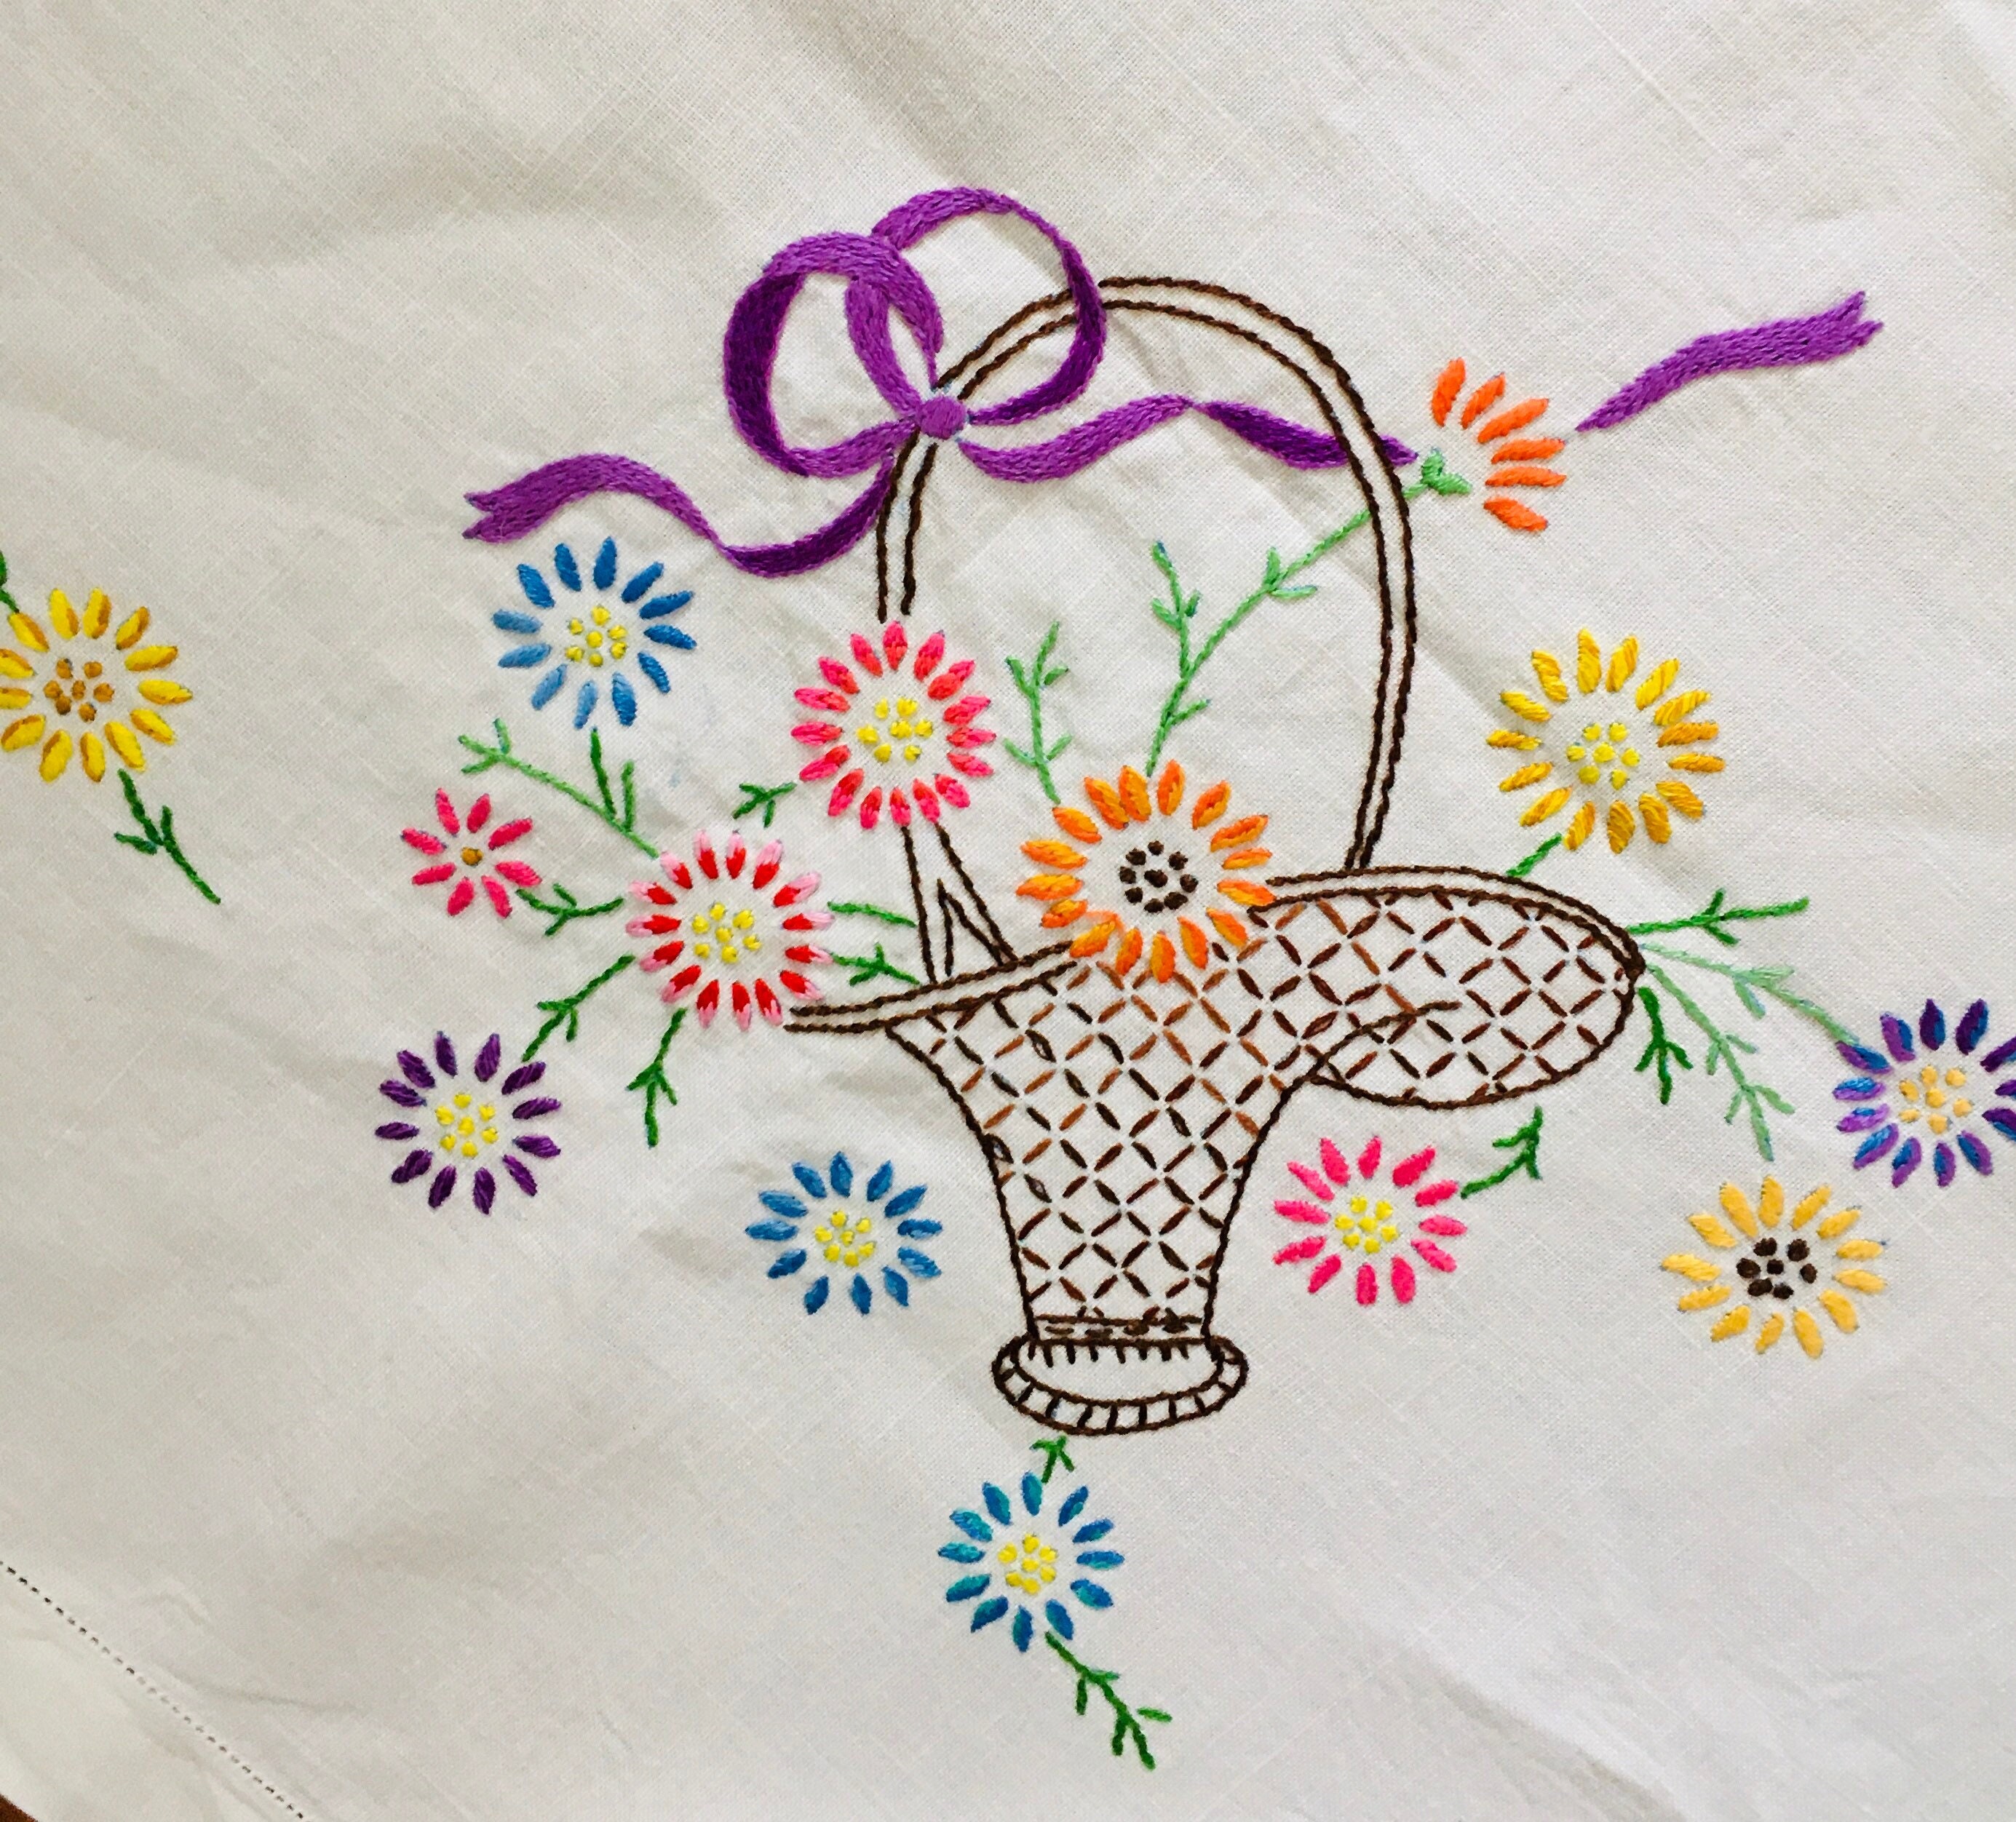 Reader's Embroidery: Flowered Tablecloths –